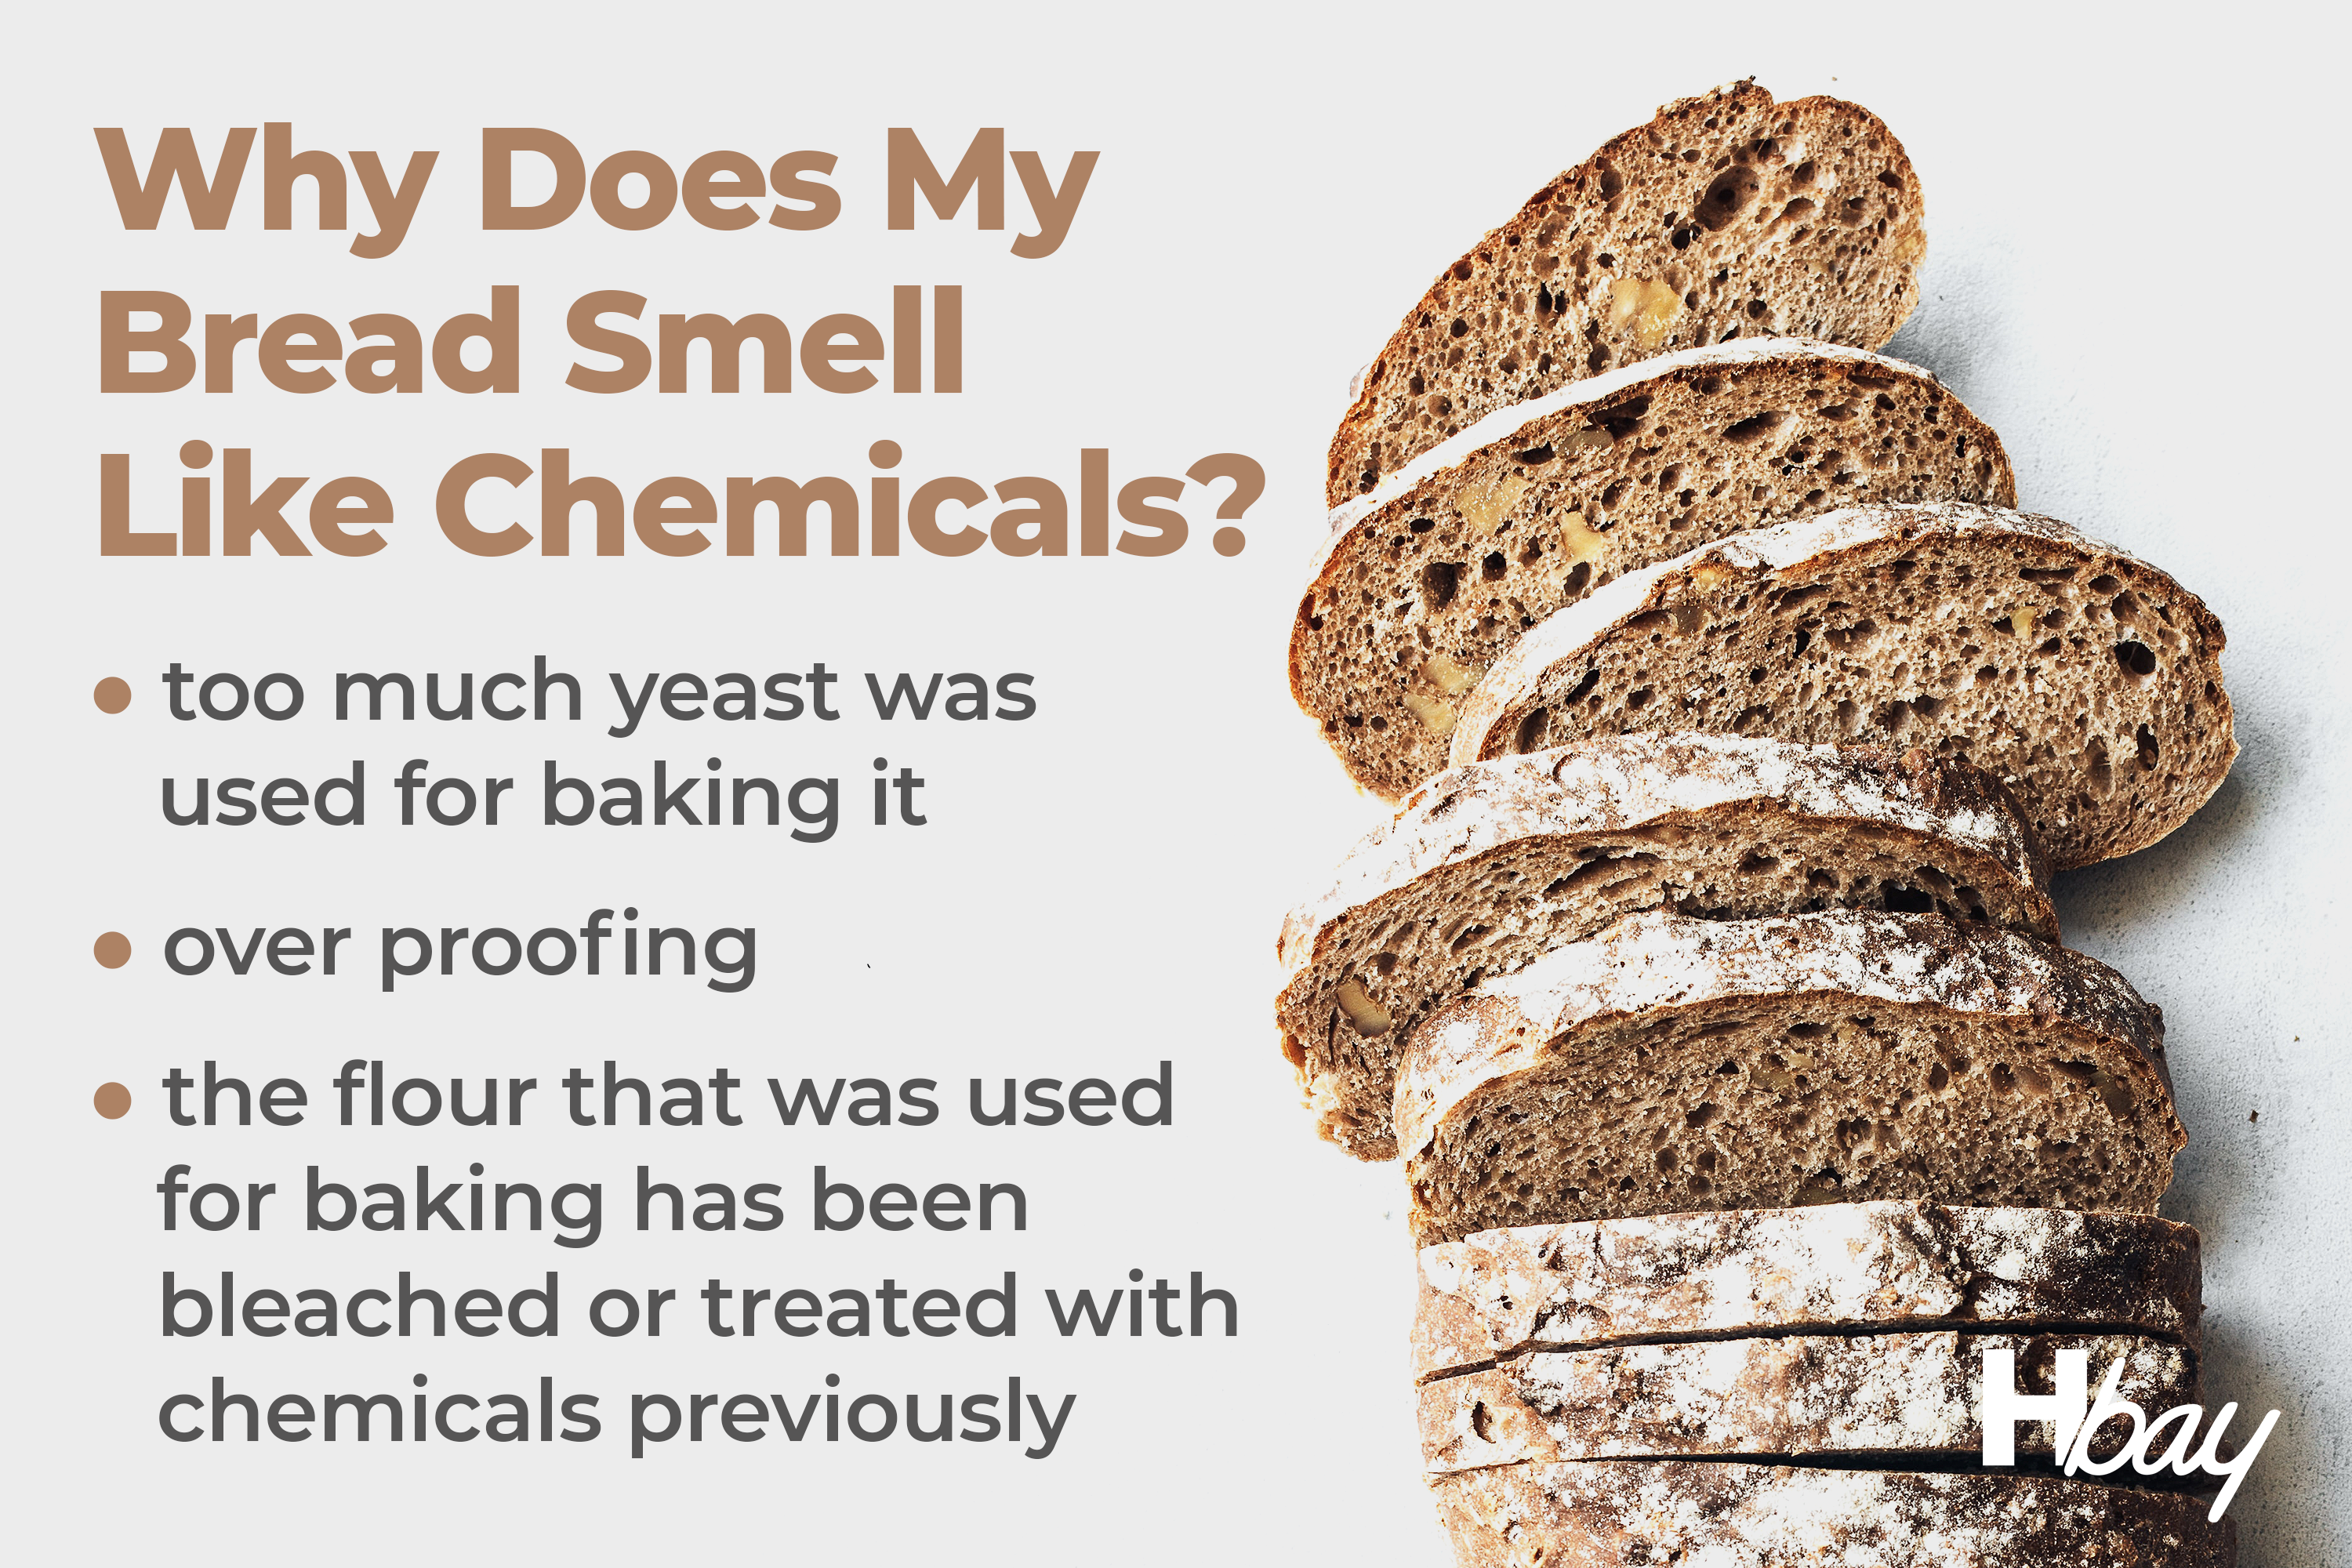 Why Does My Bread Smell Like Chemicals